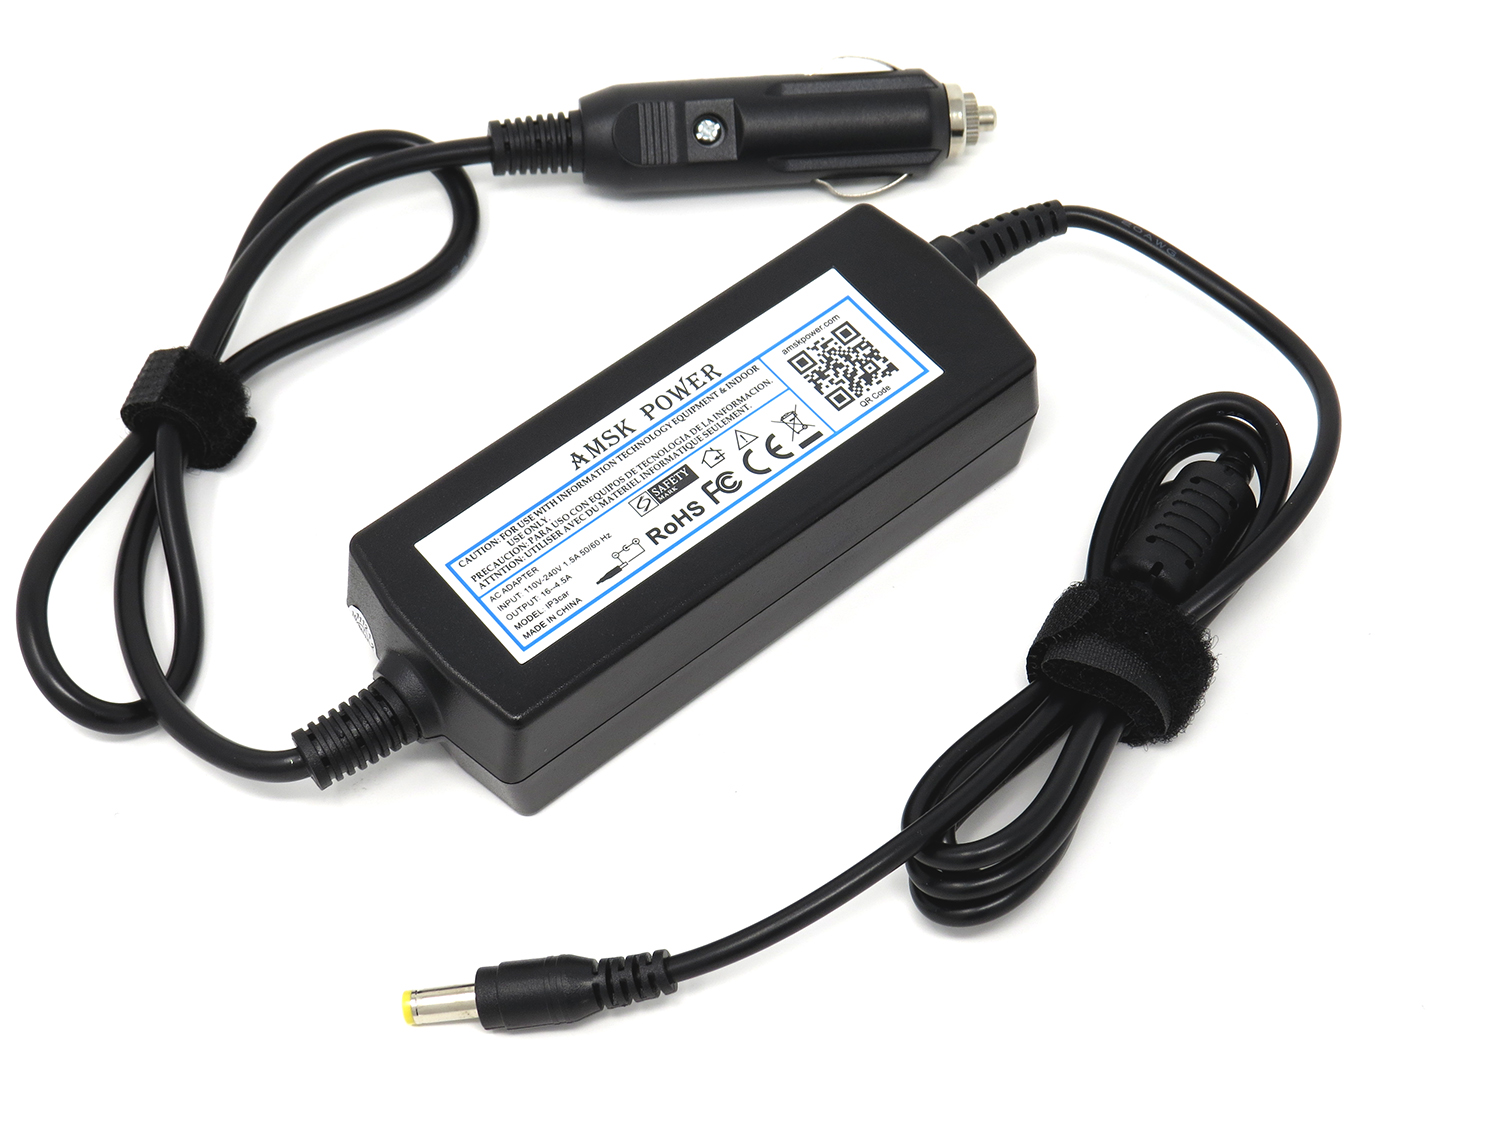 Car Charger for Panasonic Toughbook Cf-w4 Cf-w5 Cf-y2 Cf-y4 Cf-y5 Cf-28 Cf-29 Cf-30 Cf-31 Cf-50 Cf-51 Cf-52 Cf-73 Battery Power Supply Cord - image 1 of 2